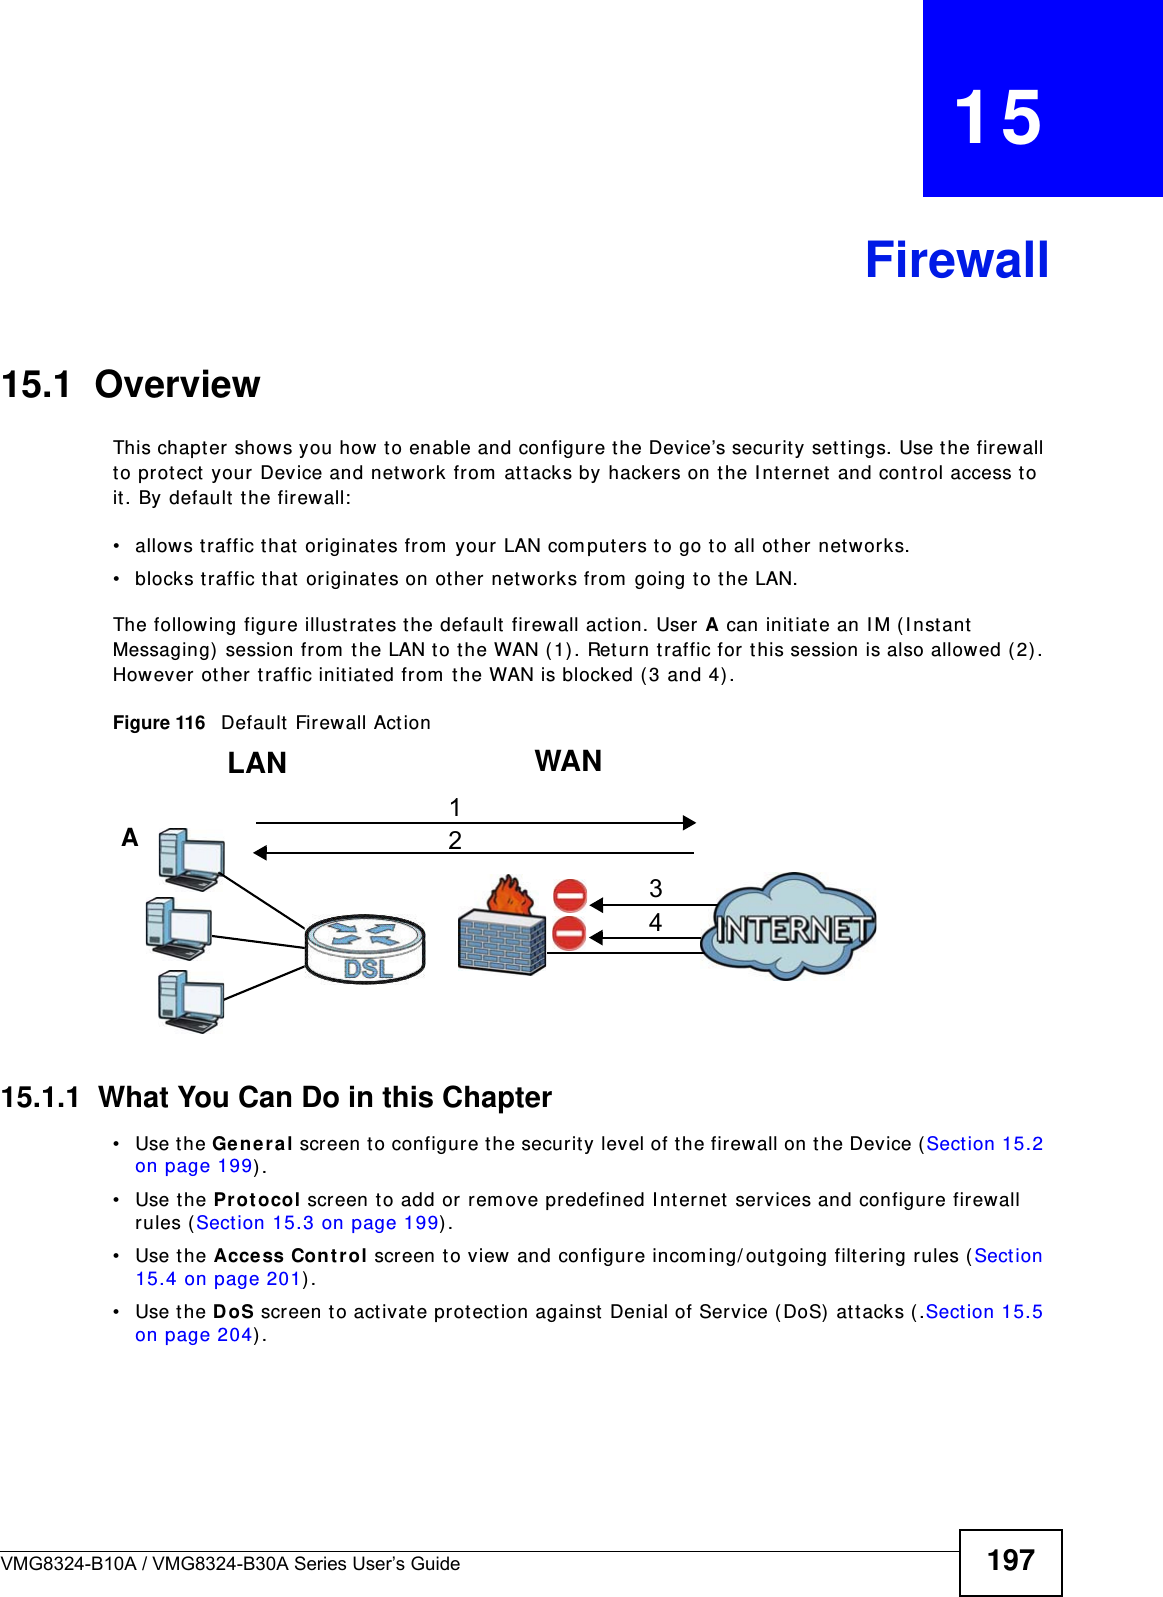 VMG8324-B10A / VMG8324-B30A Series User’s Guide 197CHAPTER   15Firewall15.1  OverviewThis chapt er shows you how t o enable and configure t he Device’s security set t ings. Use t he firewall to pr otect  your Device and network from  at t acks by hackers on t he I nternet and control access t o it . By default t he firewall:• allows t raffic that originates from  your LAN com puters to go t o all ot her networks. • blocks traffic t hat  originat es on ot her net w orks from  going t o t he LAN. The following figure illust rat es t he default firewall action. User A can initiat e an I M ( I nstant Messaging)  session from  t he LAN t o the WAN ( 1) . Ret urn t raffic for this session is also allowed (2) . However ot her t raffic init iated from  t he WAN is blocked (3 and 4) .Figure 116   Default  Fir ewall Action15.1.1  What You Can Do in this Chapter• Use the Ge n e r al screen t o configure t he security level of the firewall on t he Device ( Sect ion 15.2 on page 199) .• Use the Pr otocol screen t o add or rem ove predefined I nt ernet  services and configure firewall rules ( Sect ion 15.3 on page 199) .• Use the Acce ss Cont r ol screen to view and configure incom ing/ outgoing filt ering rules ( Section 15.4 on page 201) . • Use the DoS screen t o act ivat e protect ion against  Denial of Service ( DoS)  att acks ( .Sect ion 15.5 on page 204) .WANLAN3412A